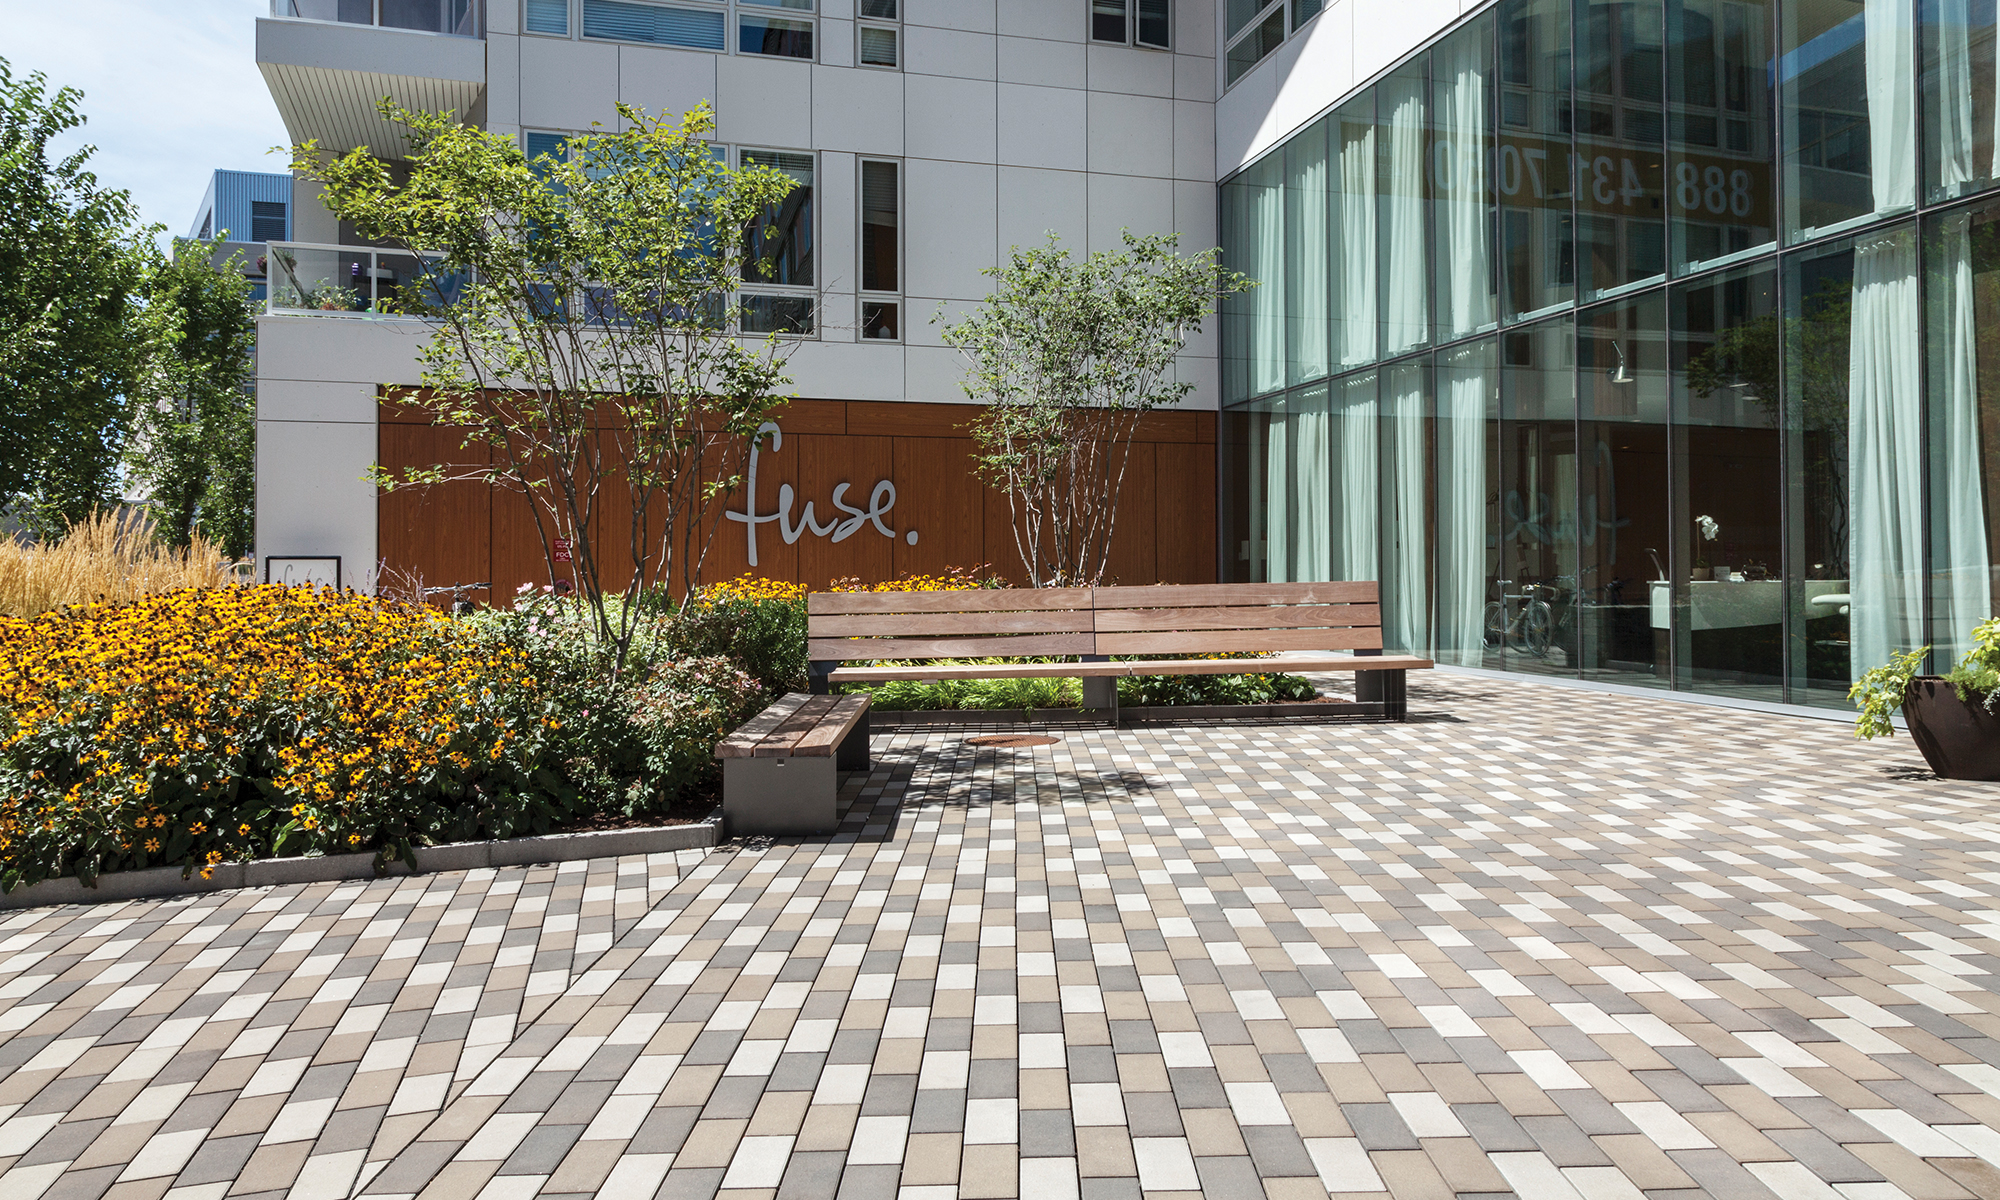 At the Fuse Condominium in Cambridge, Massachusetts, Halvorson Design Partnership selected permeable pavers for the courtyard and two roof decks to support maximum infiltration and enhance the pool, lounging, and dining areas.